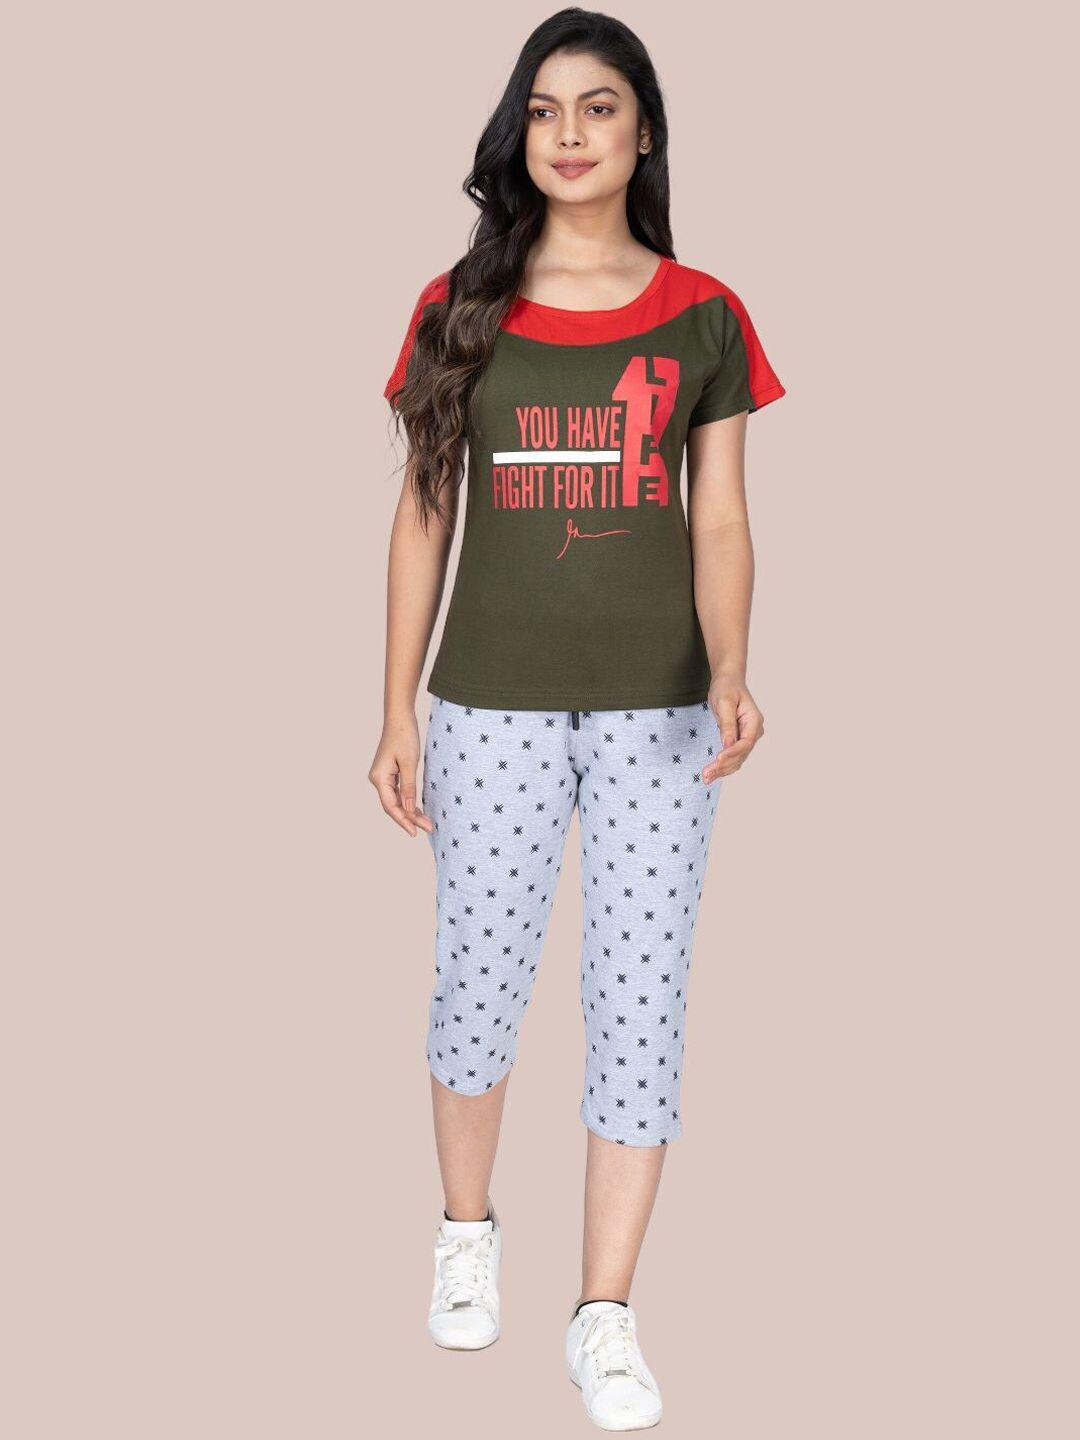 styleaone women printed t-shirt with capris